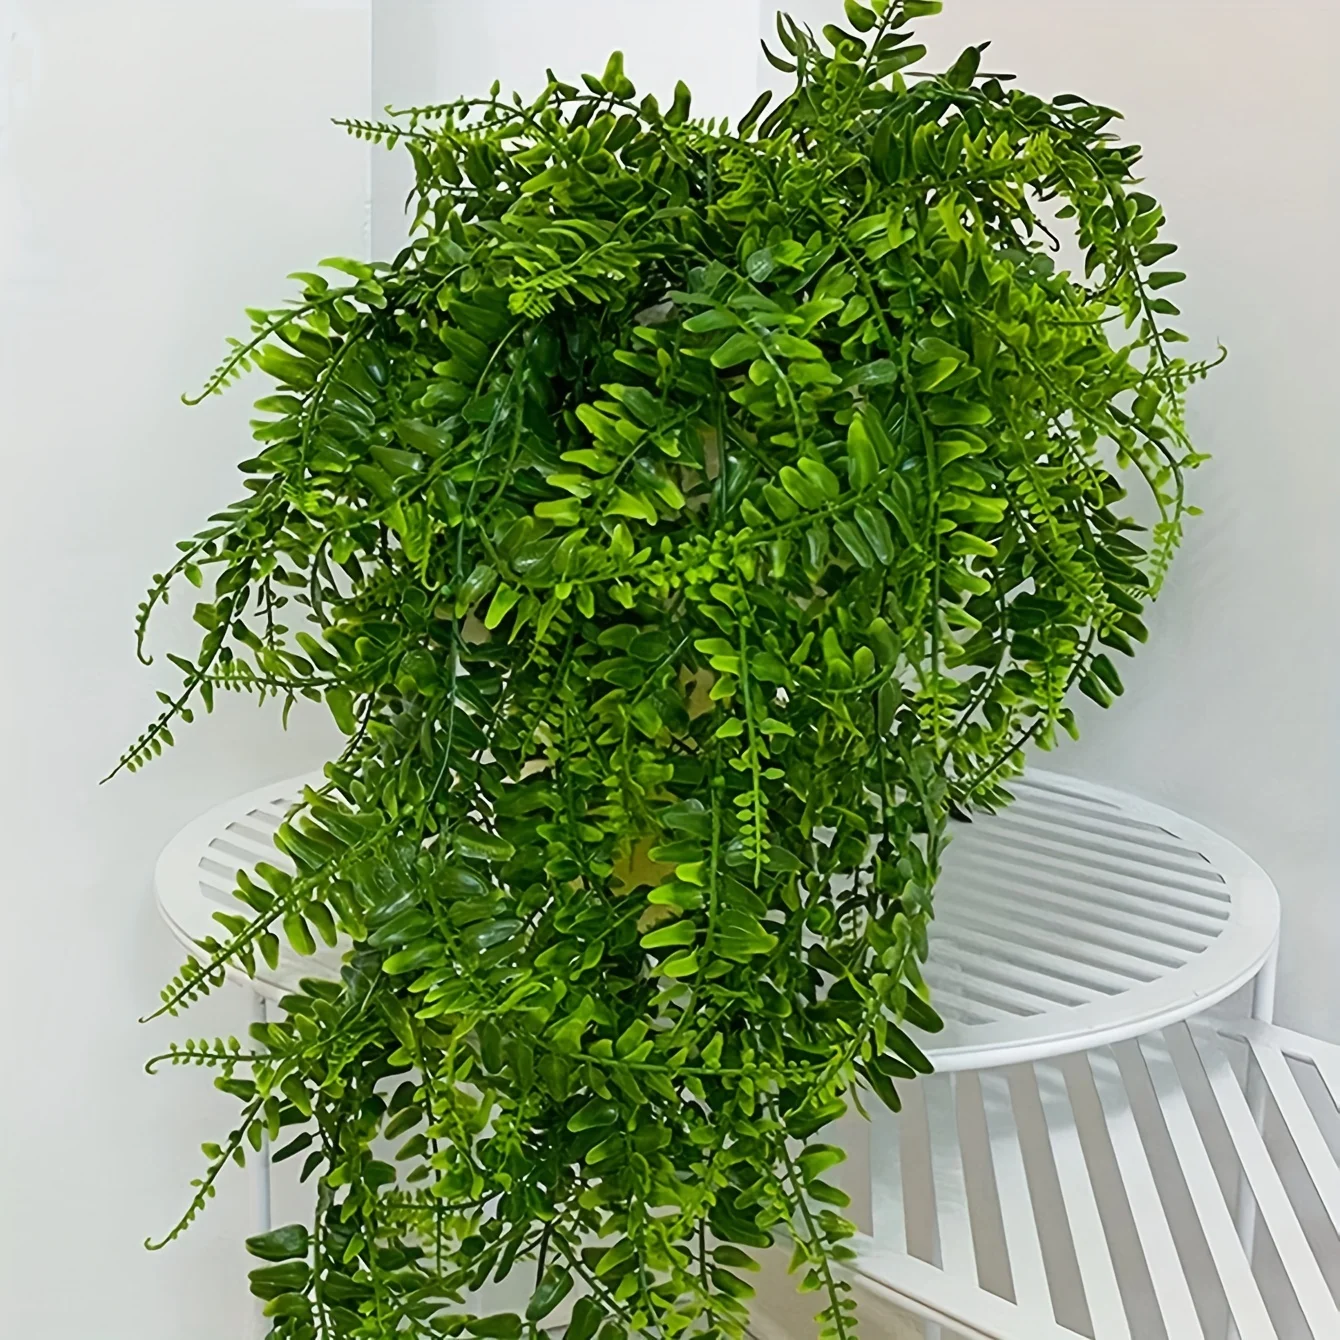 1pc/2pcs  90cm/35.43inch Simulated Wall Hanging Persian Grass Vine Artificial Hanging Fern Plant Vine Hanging Green Plant